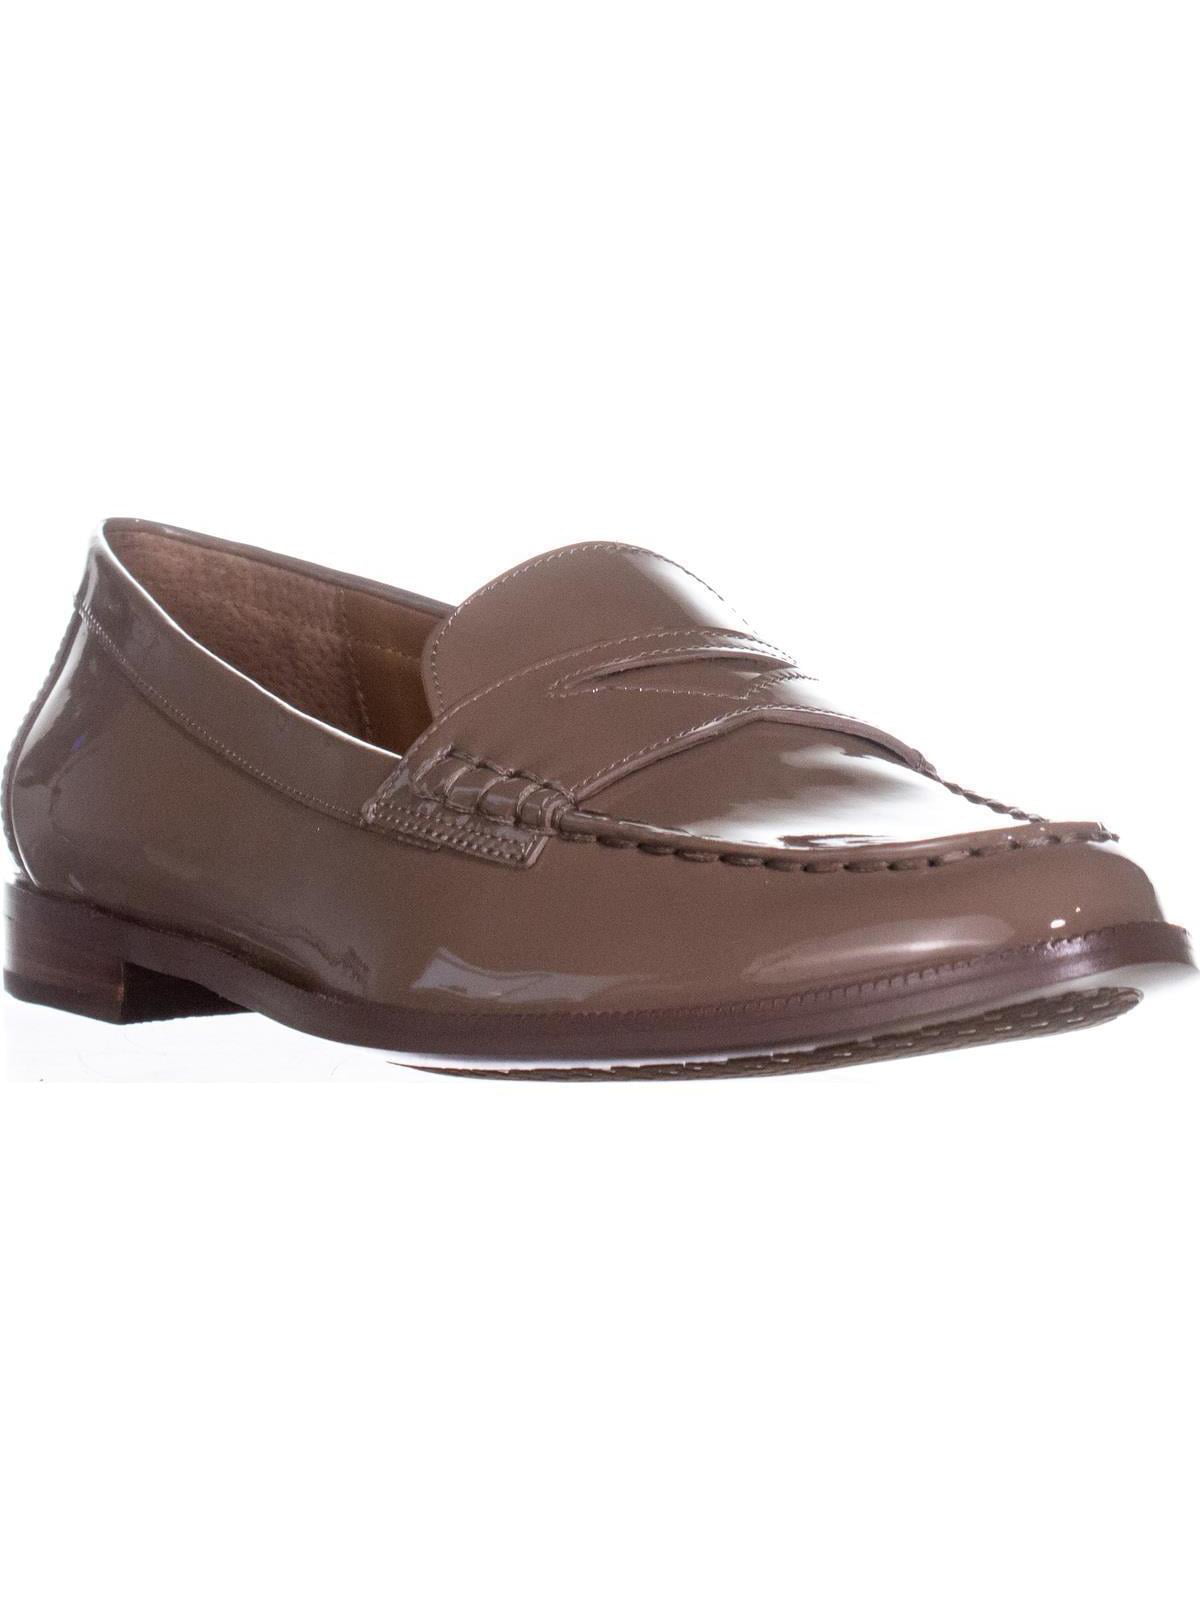 Lauren Ralph Lauren - Womens Lauren Ralph Lauren Barrett Penny Loafers ...